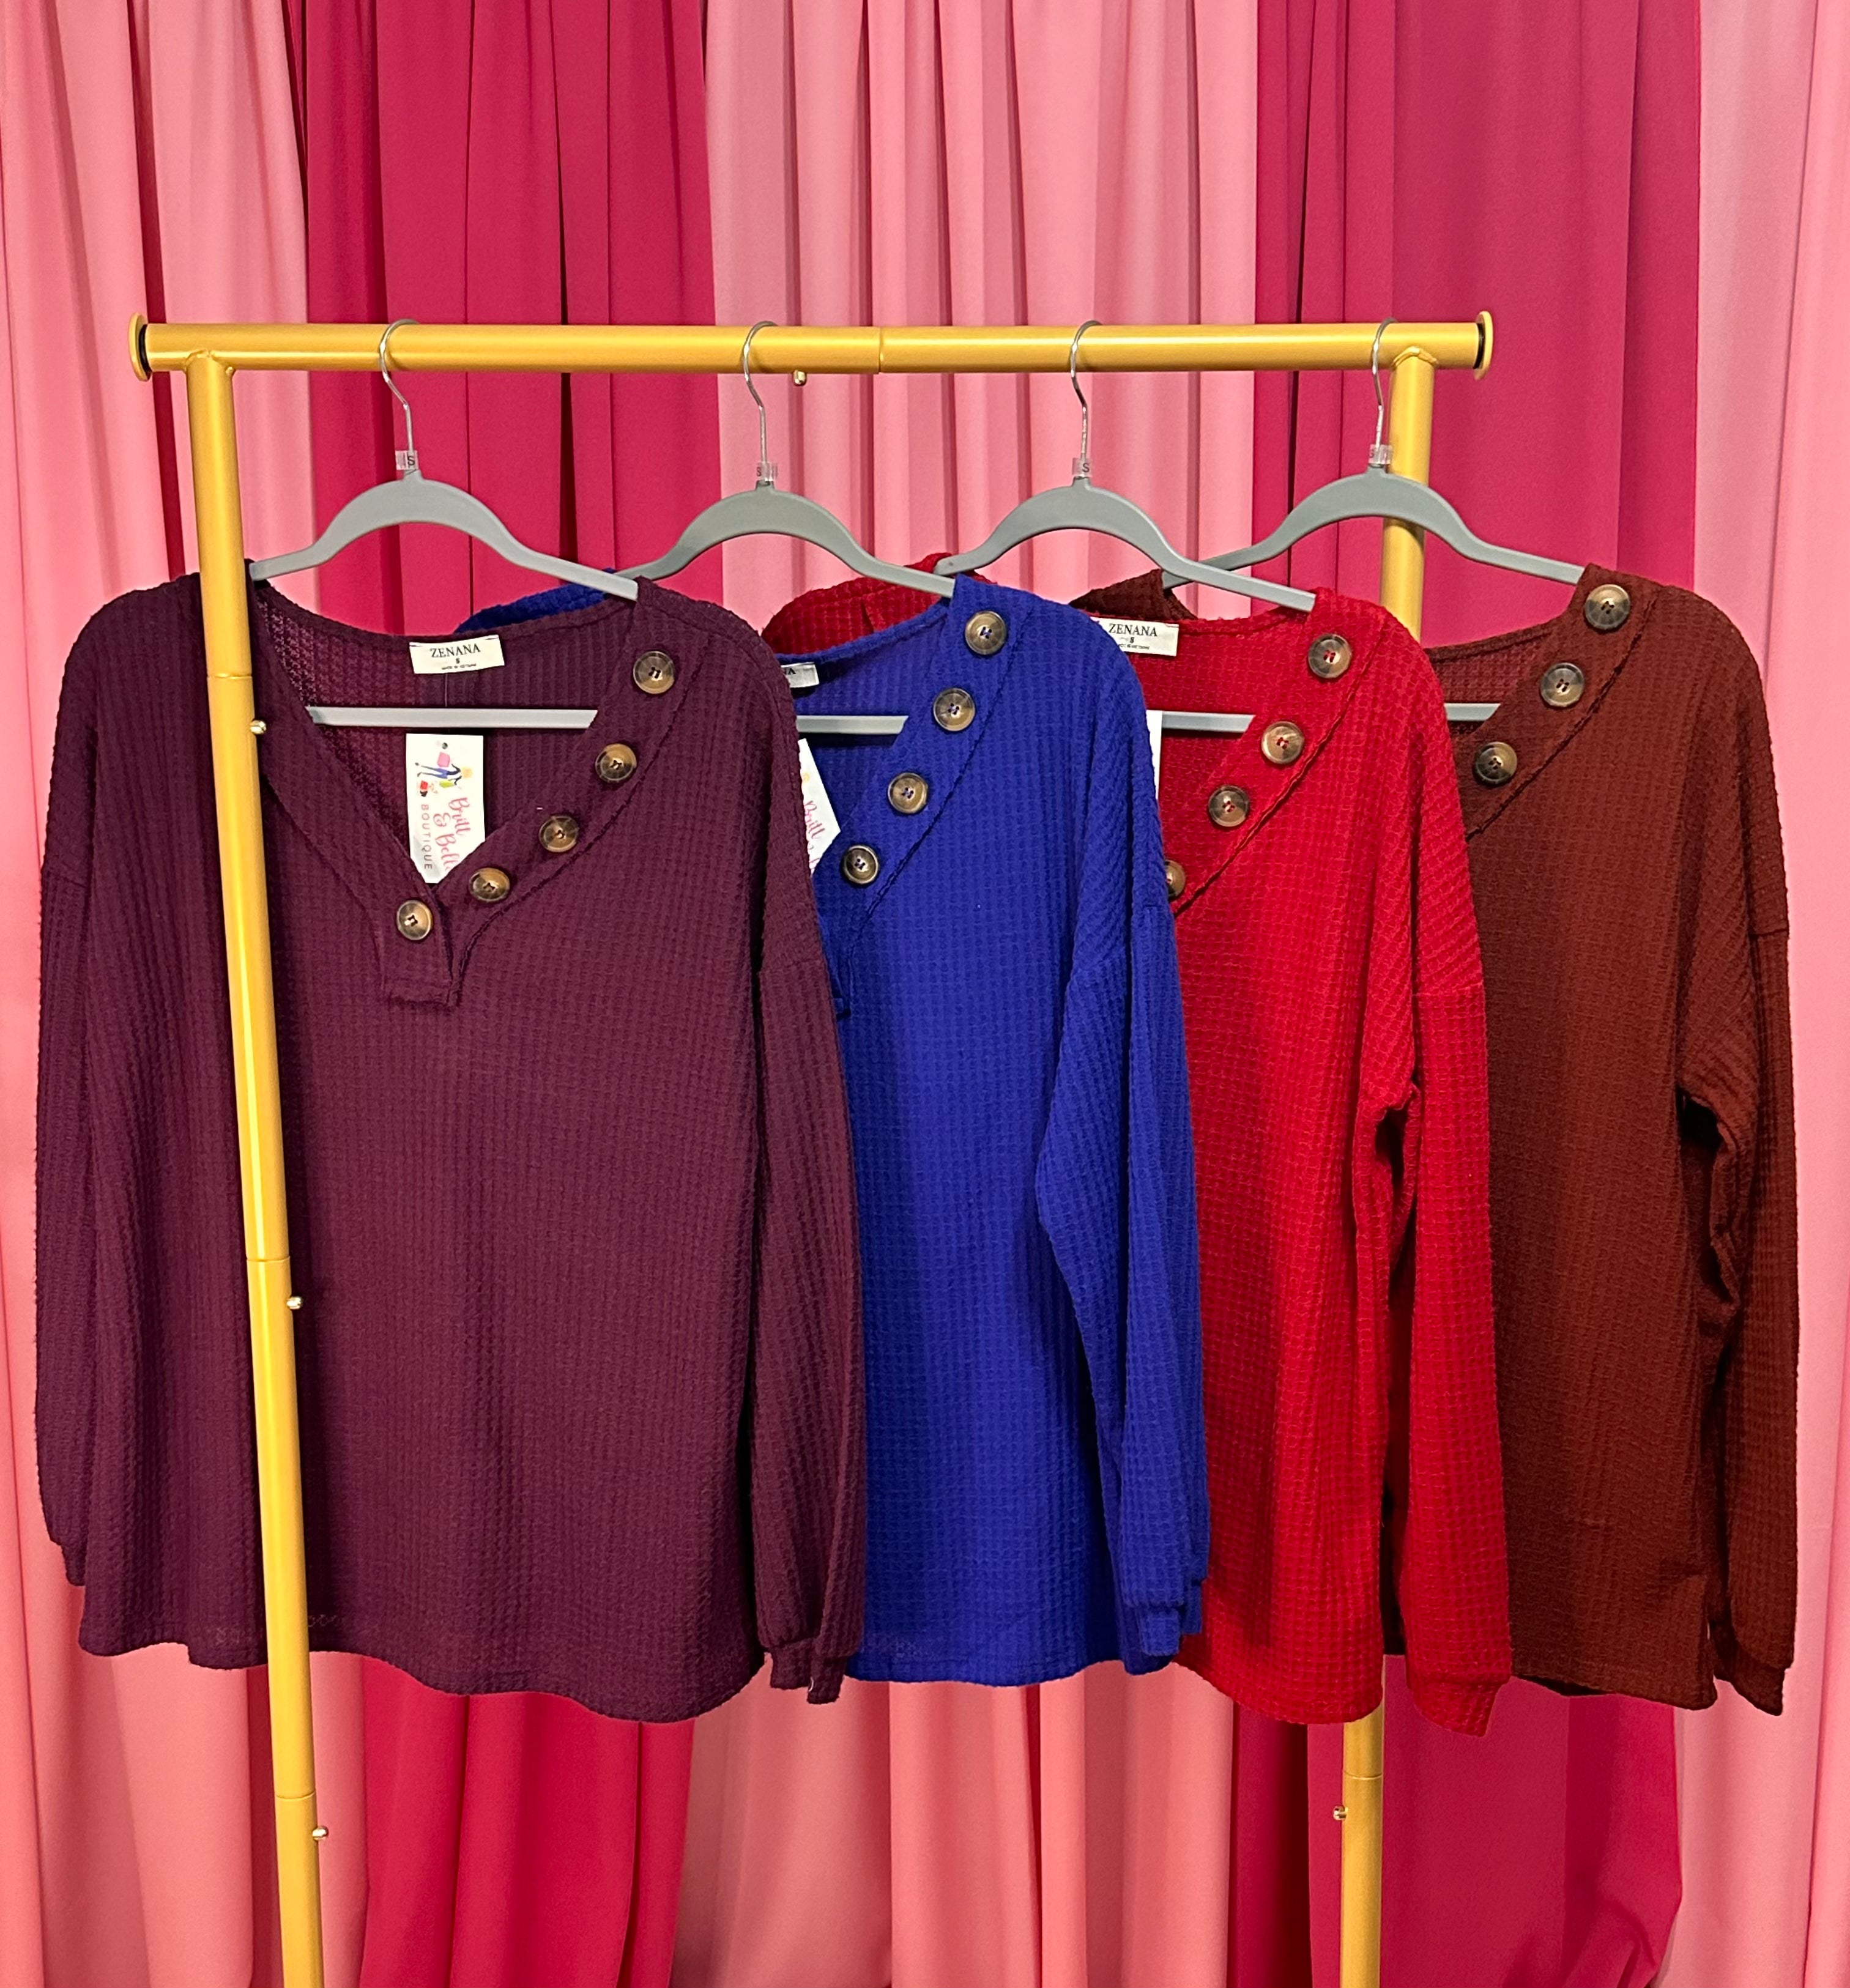 Brushed Waffle V-Neck Button Detail Tops in colors plum, blue, red, and rust